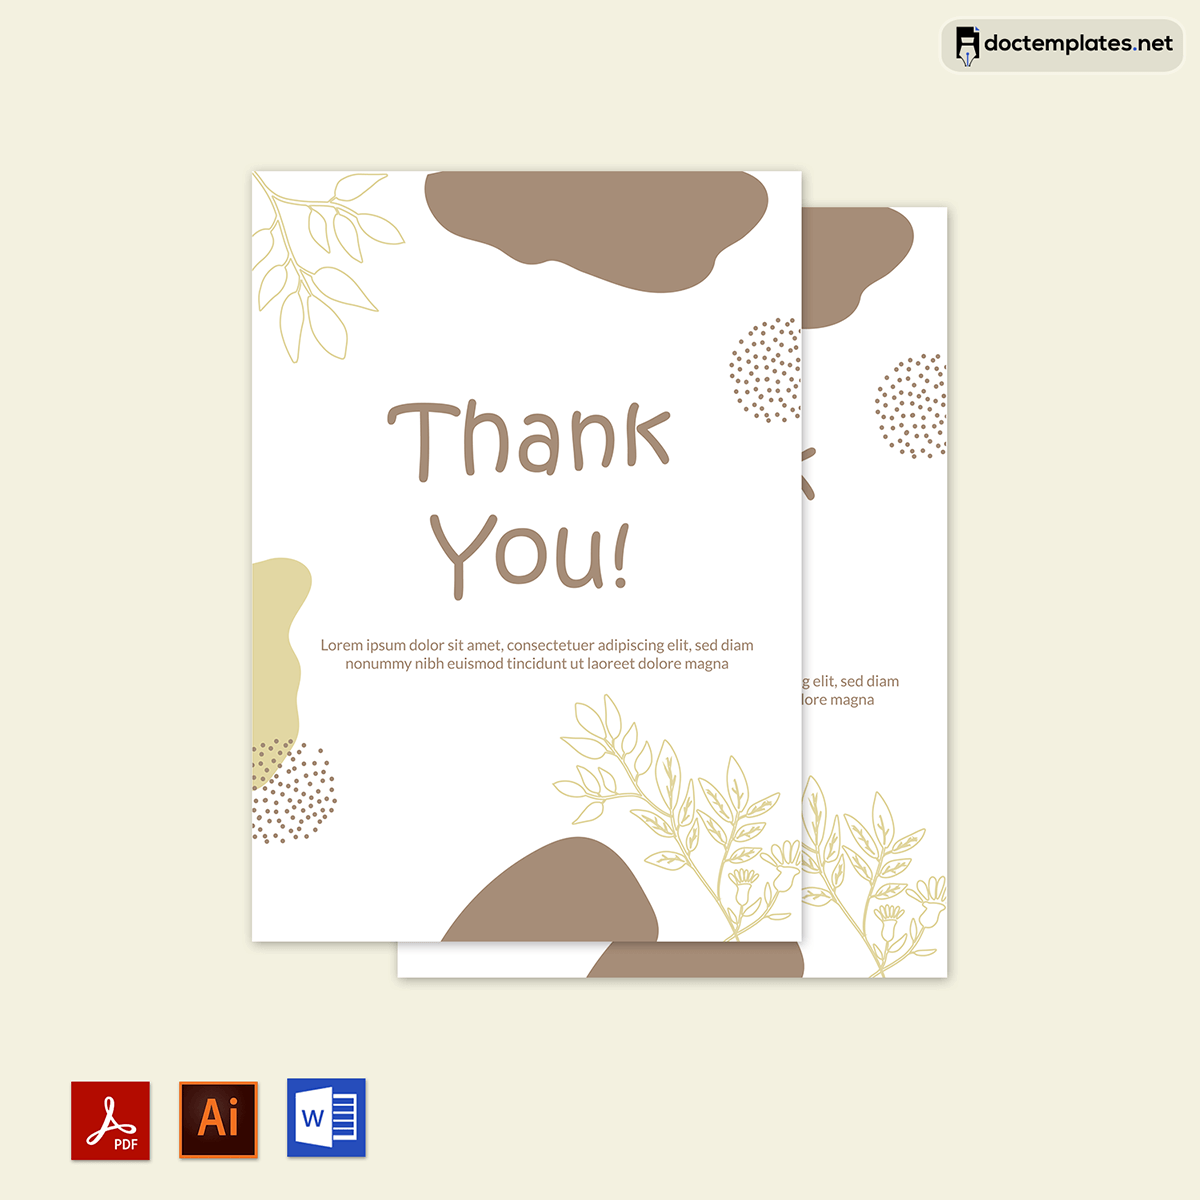 Image of Thank you card format
Thank you card format
01